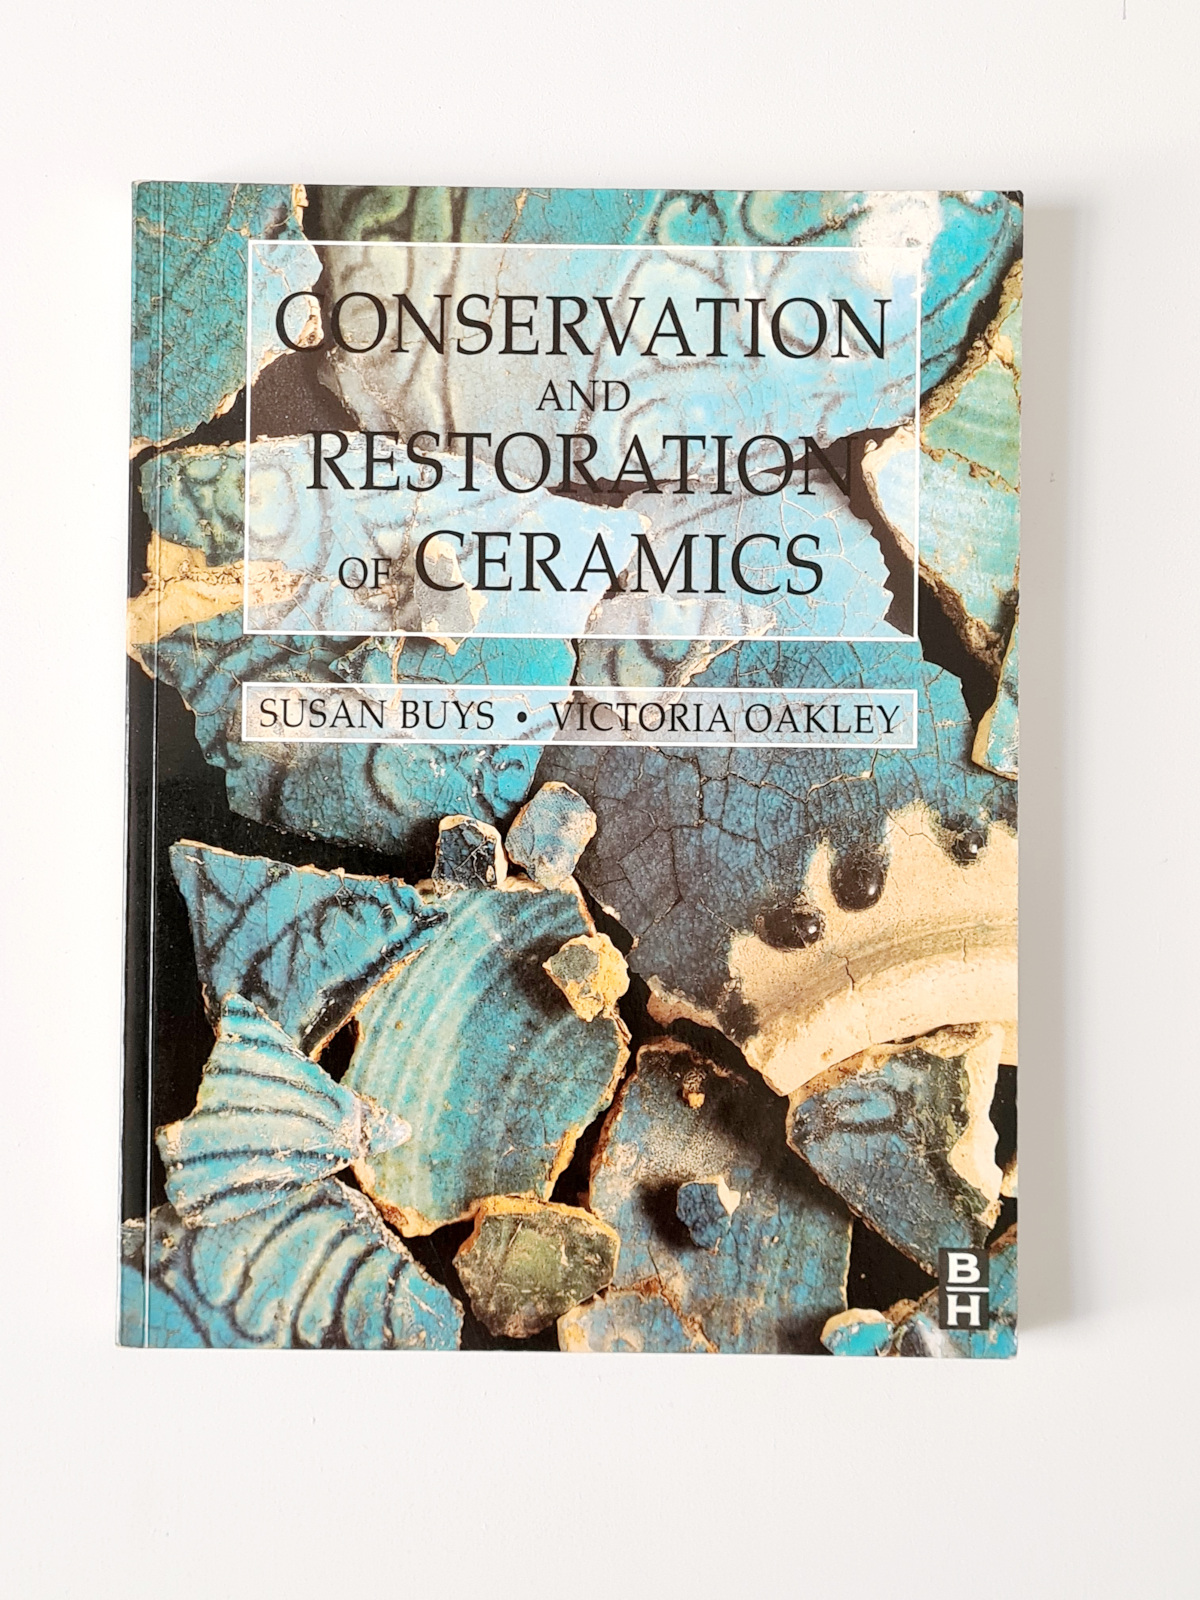 Conservation and Restoration of Ceramics by Buys and Oakley